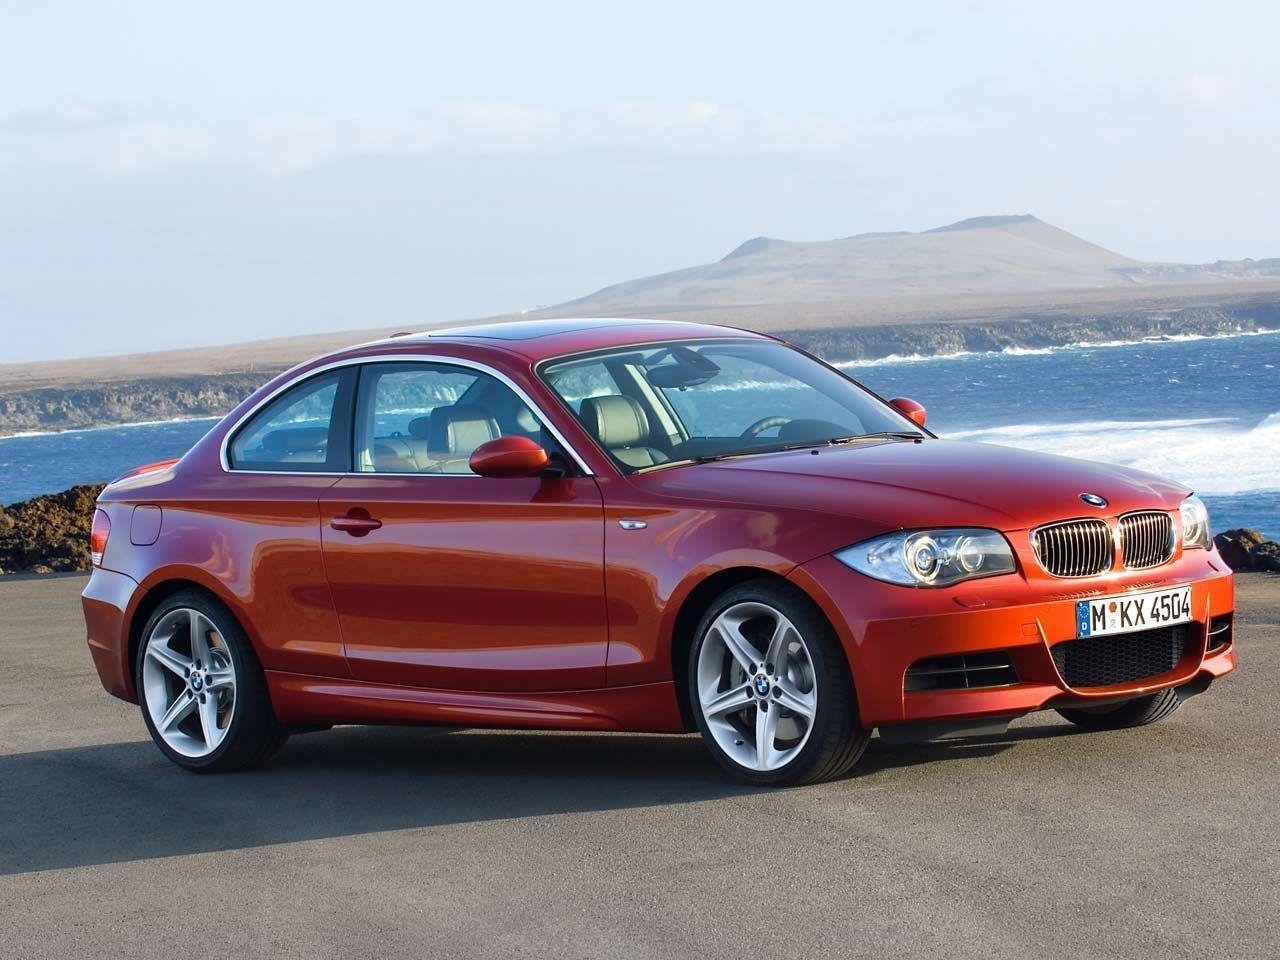 bmw 135i Wallpaper. Cars Wallpaper And Picture car image, car